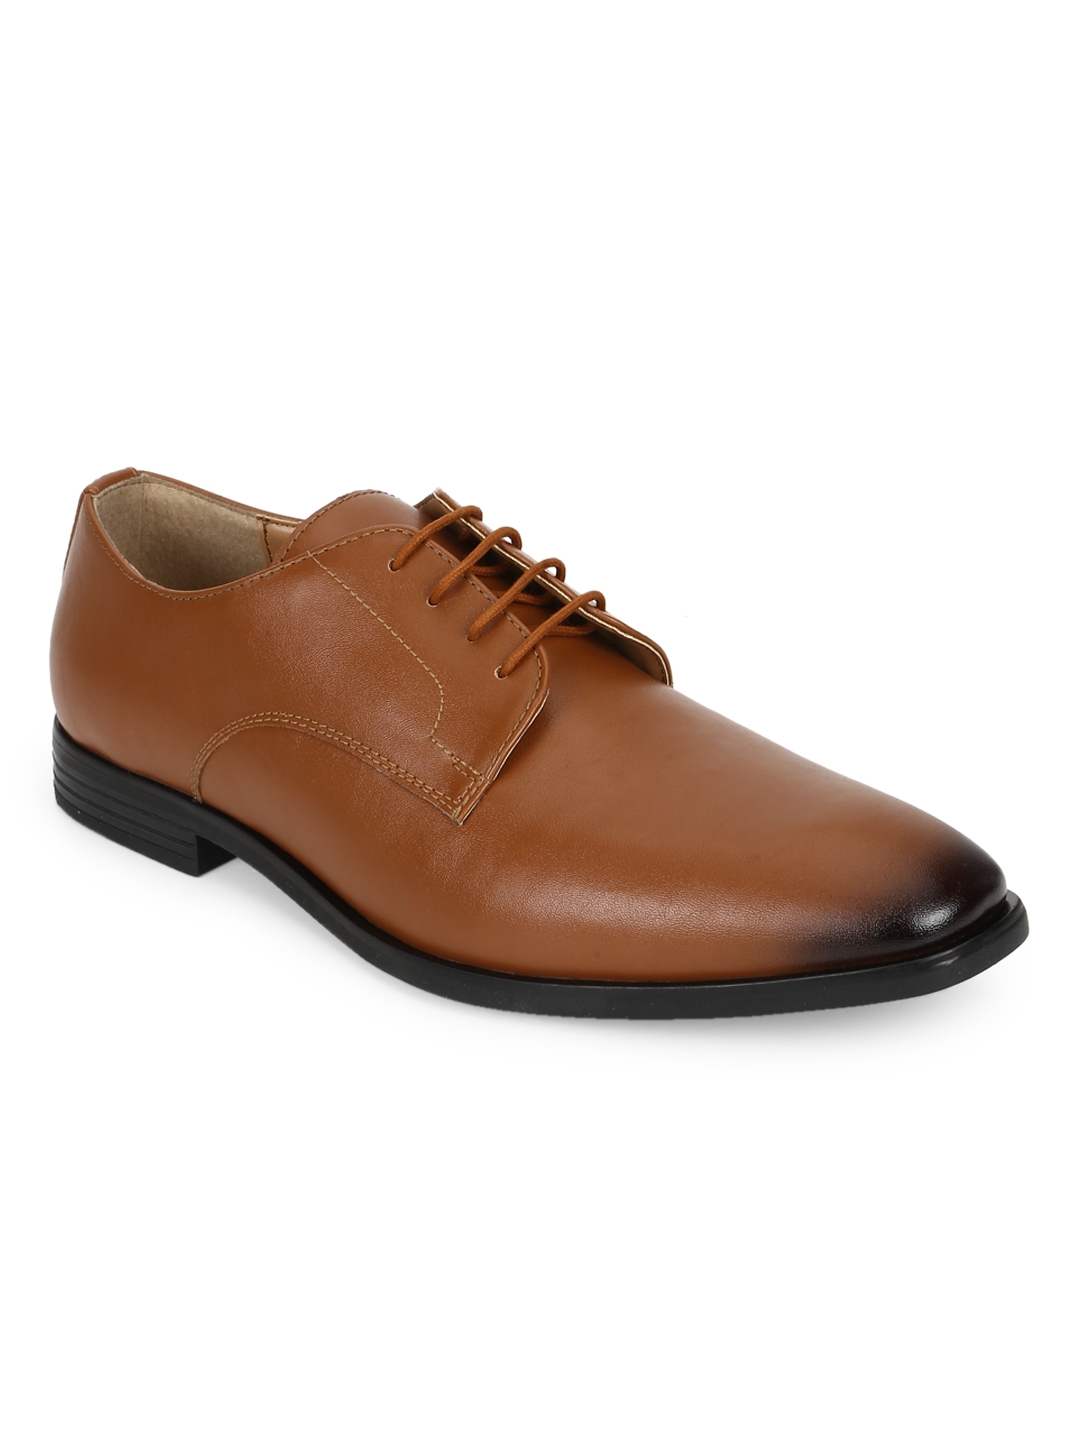 Truffle Collection | Tan PU Men's Low Heel Lace Up Shoes